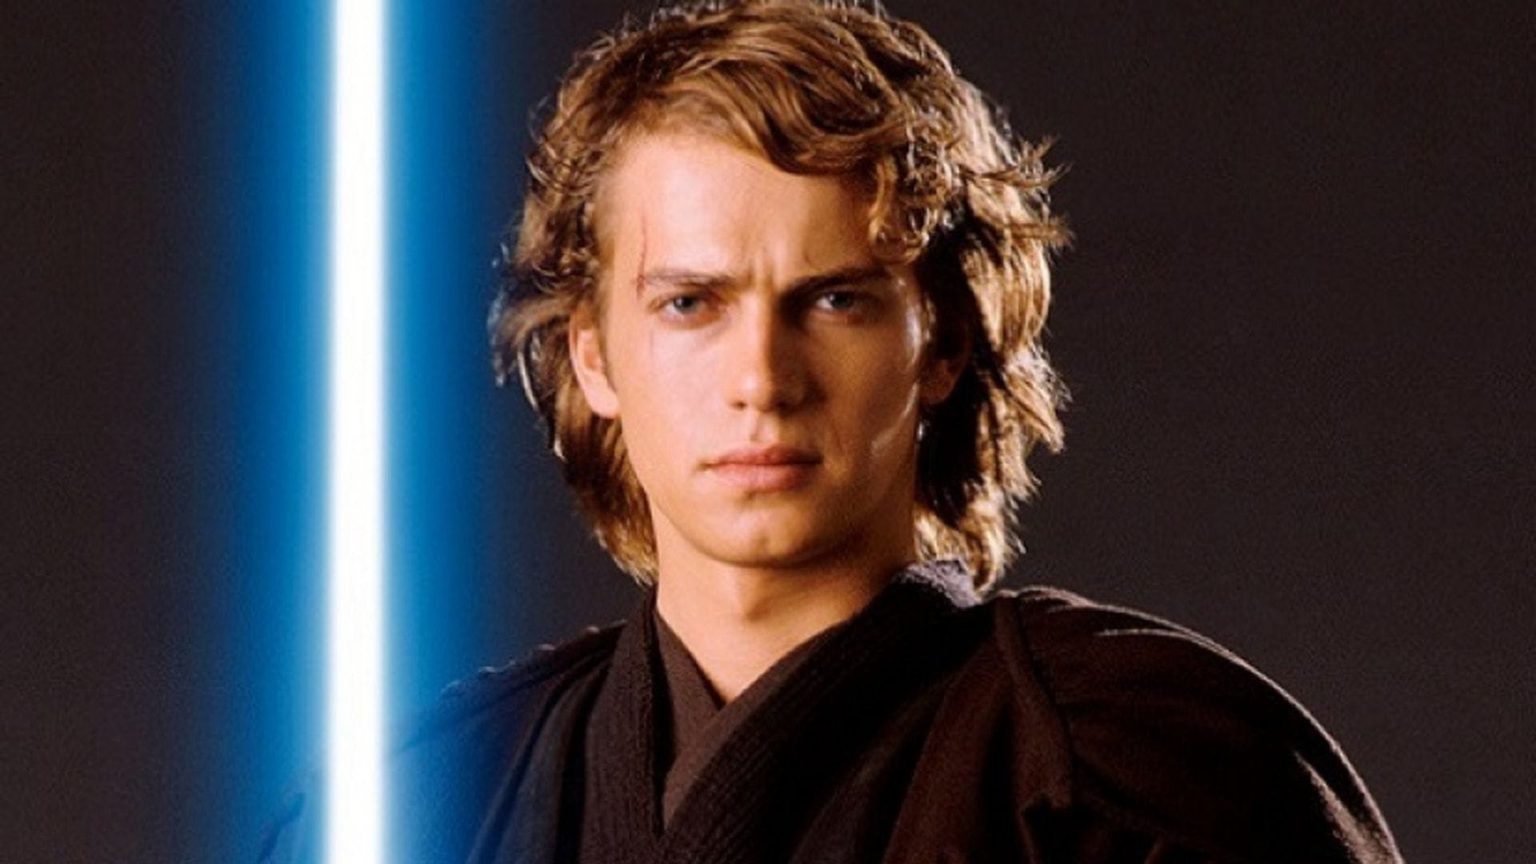 Anakin Skywalker from Revenge of the Sith